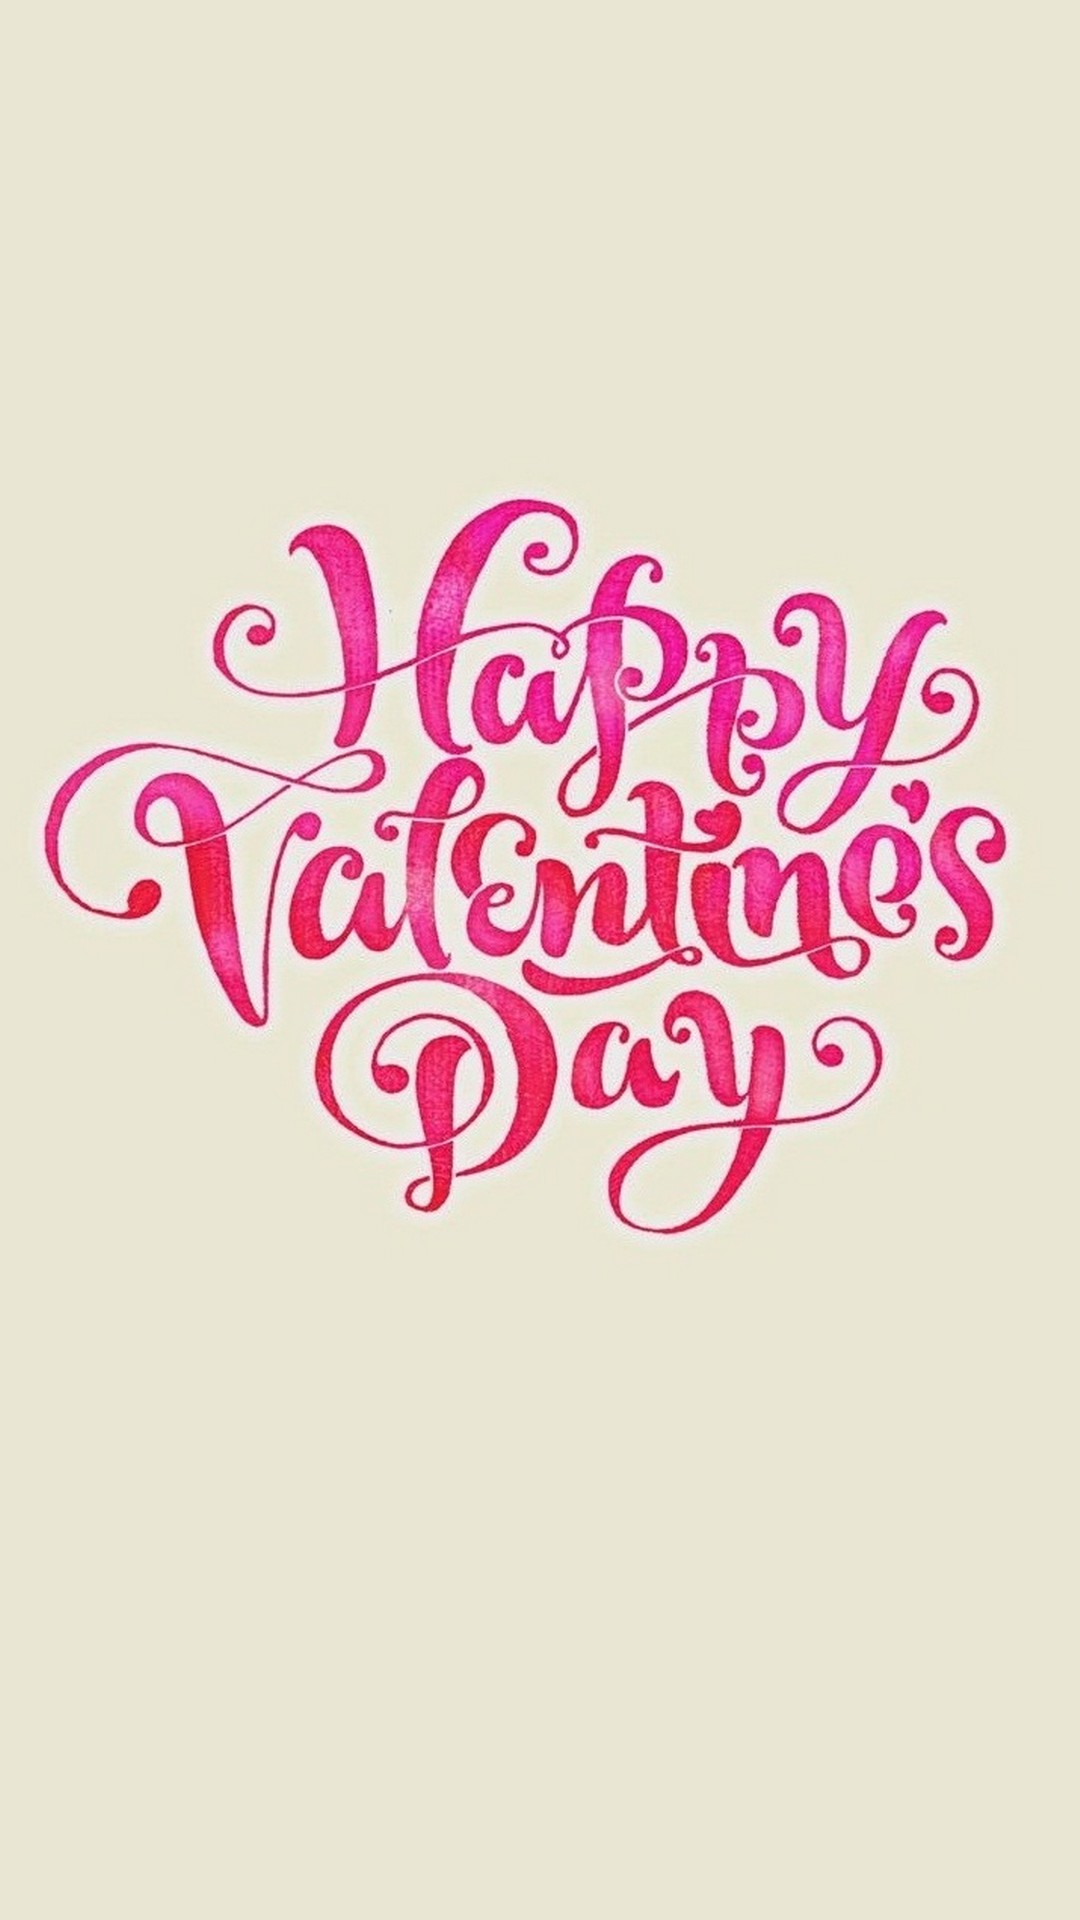 🔥 Free download Android Wallpaper Happy Valentines Day Images Android